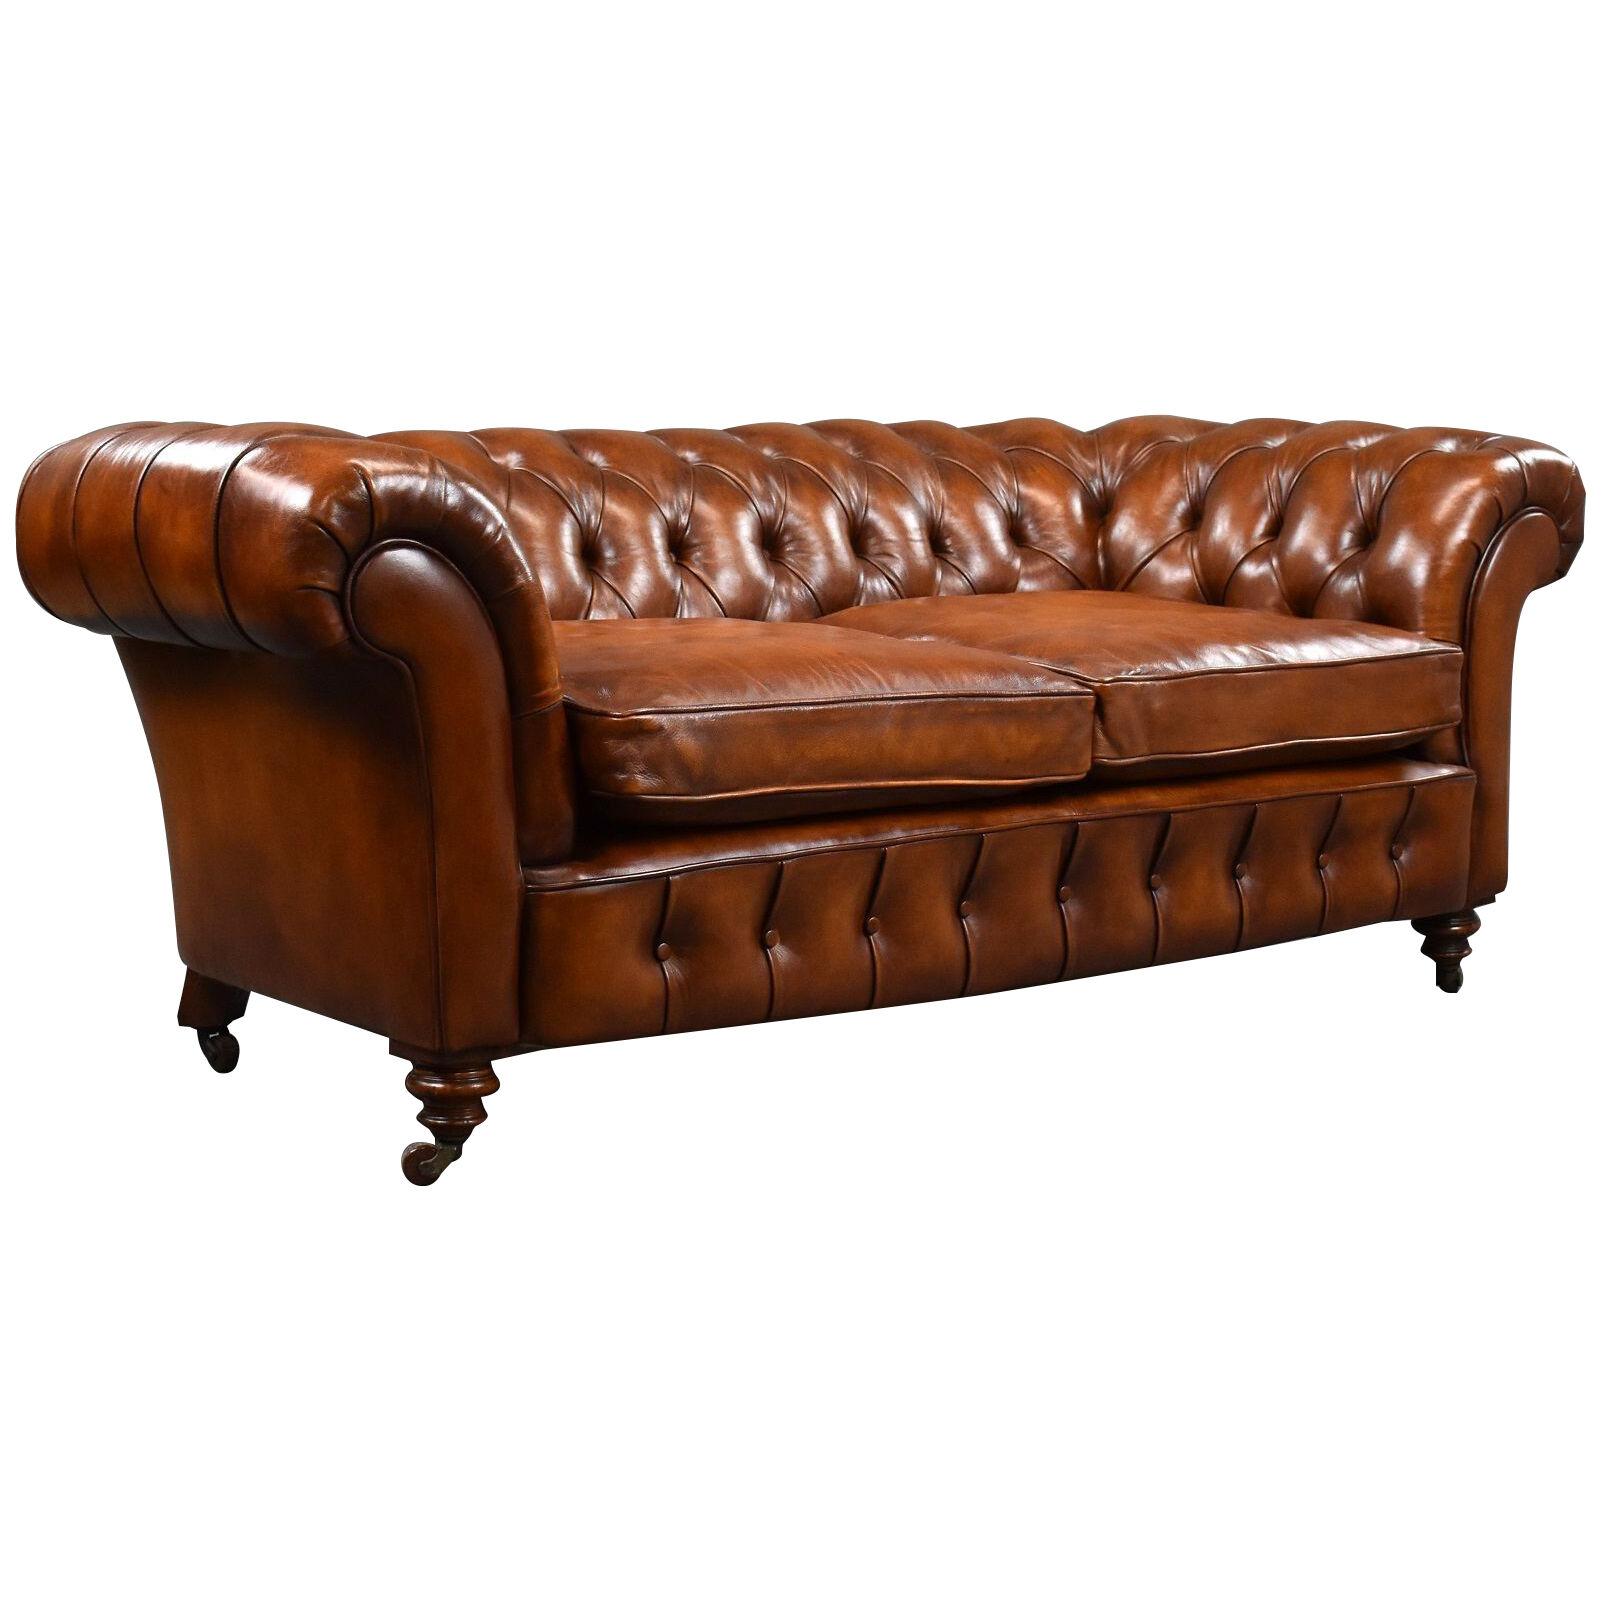 Victorian Brown Leather Two Seater Chesterfield